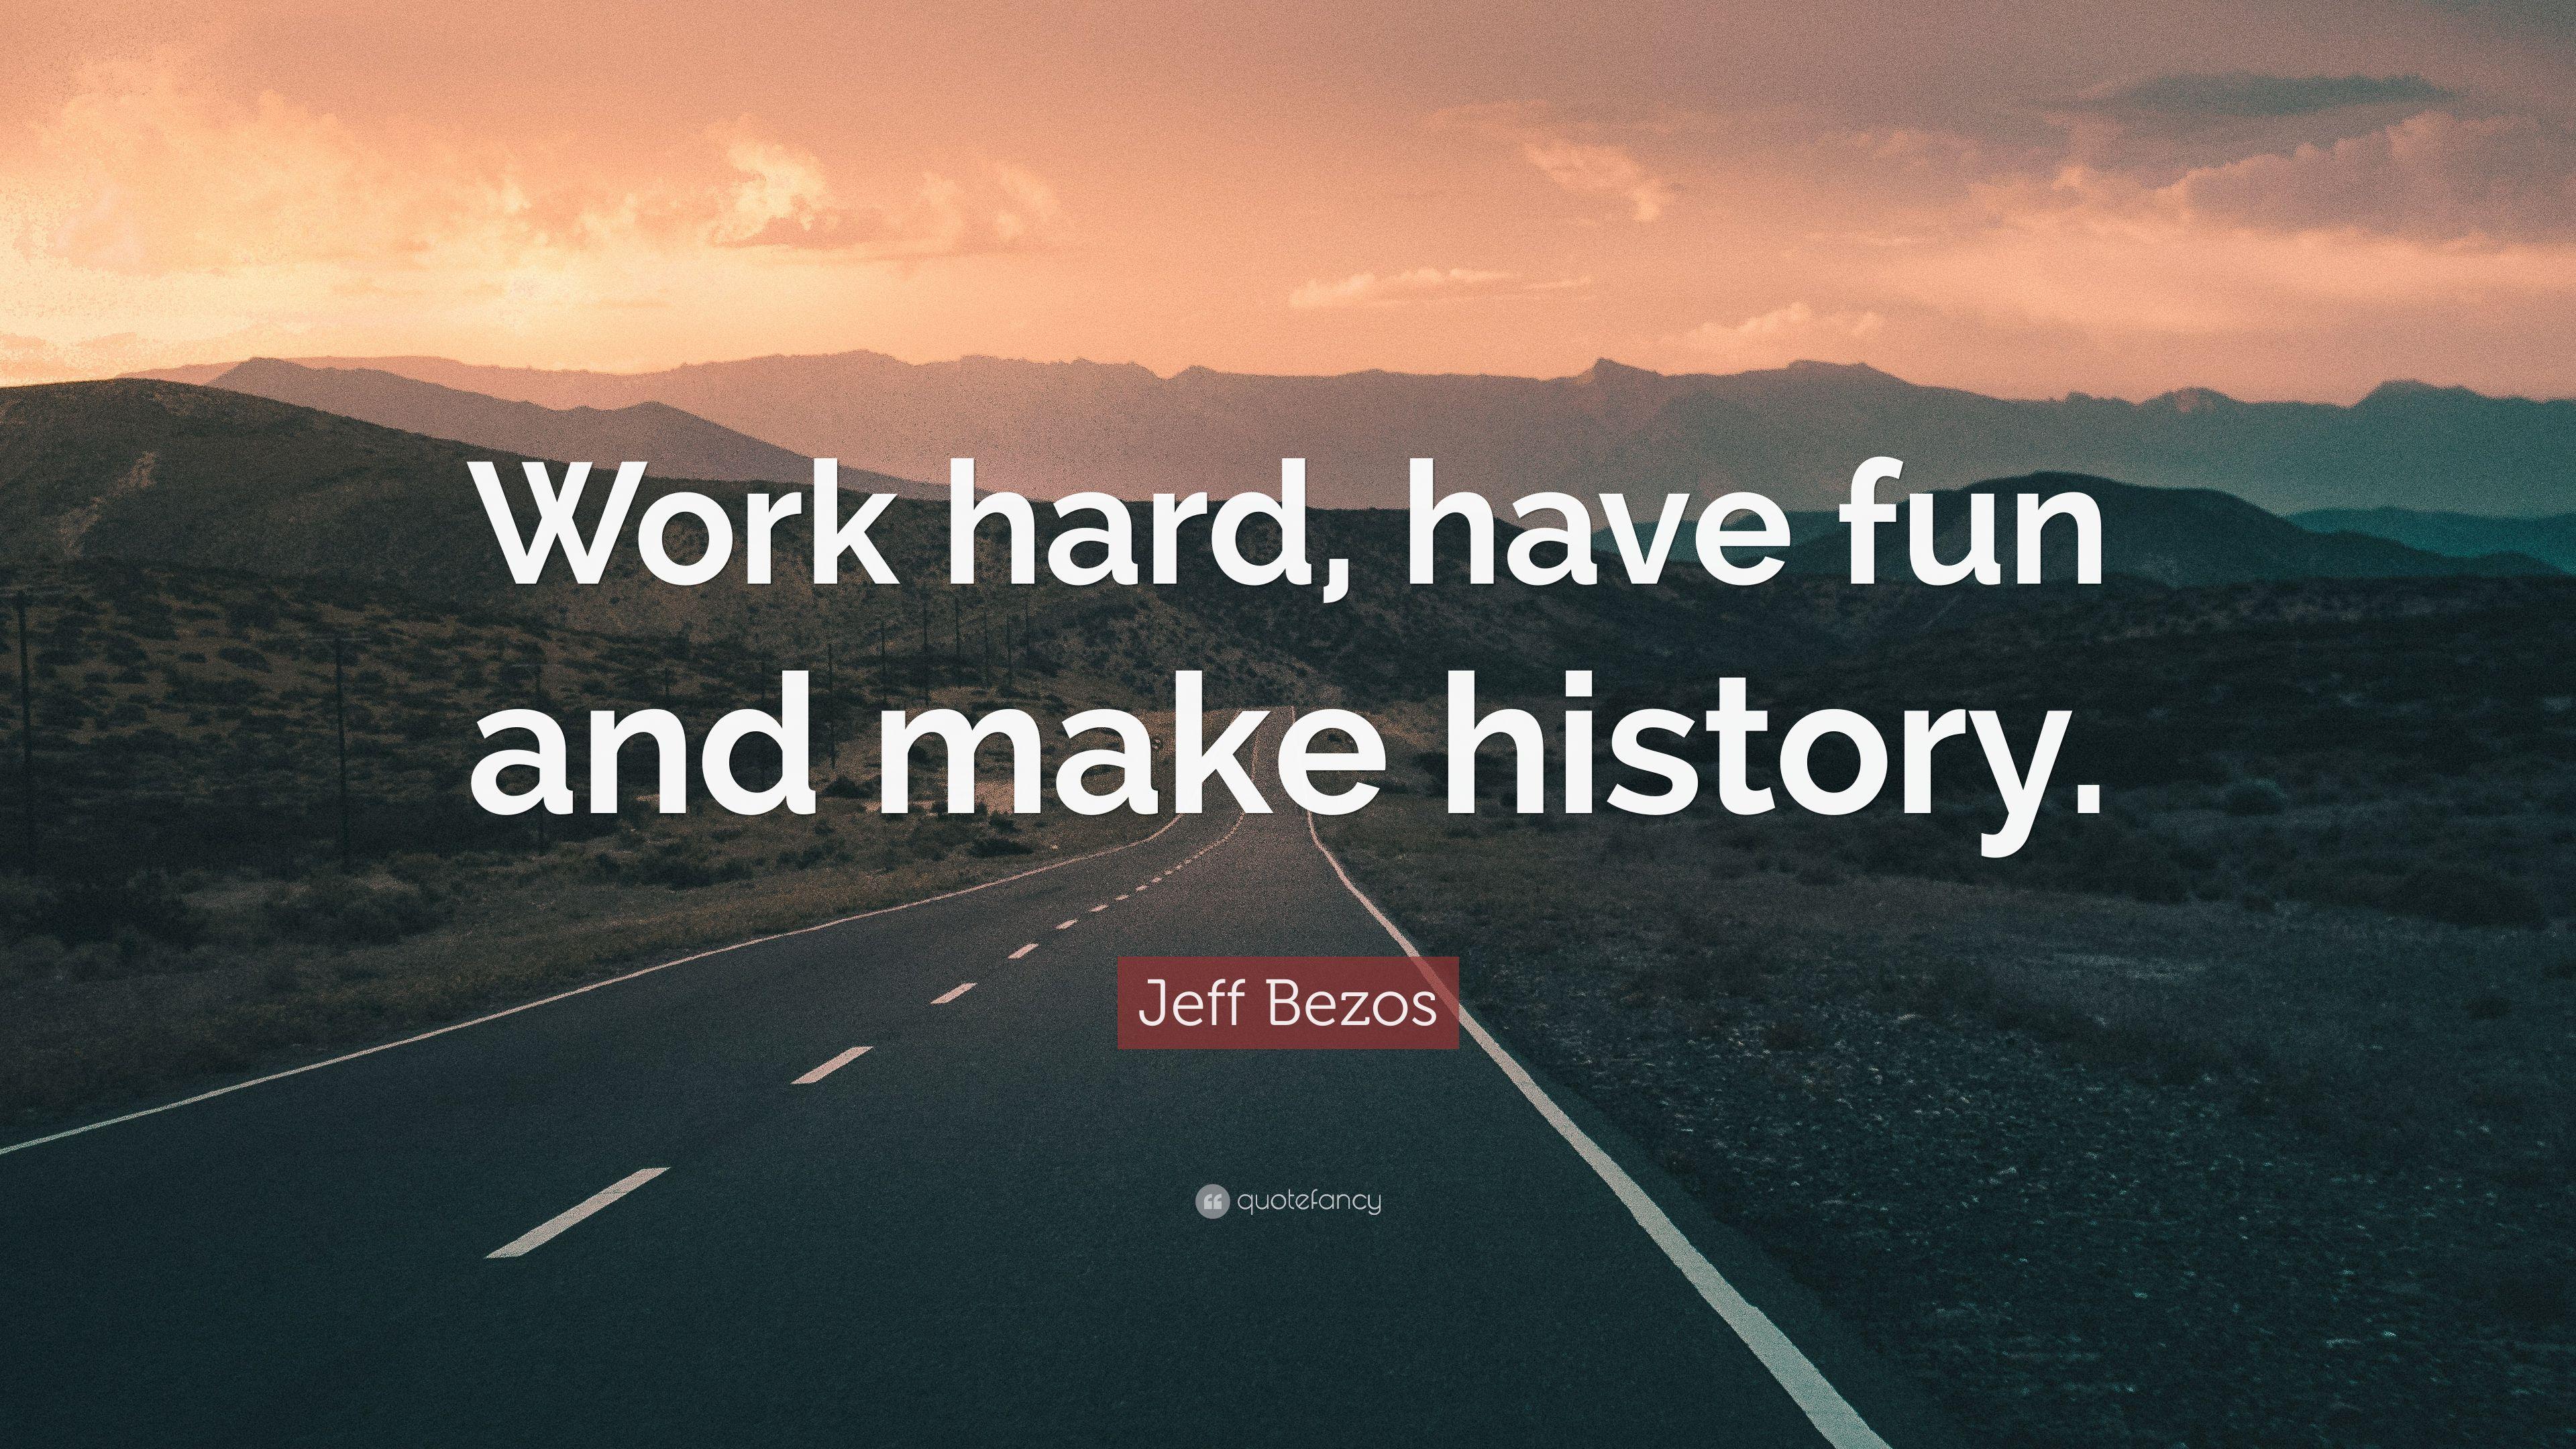 Quote On Work Hard 4k Wallpaper Hd Wallpapers | Images and Photos finder